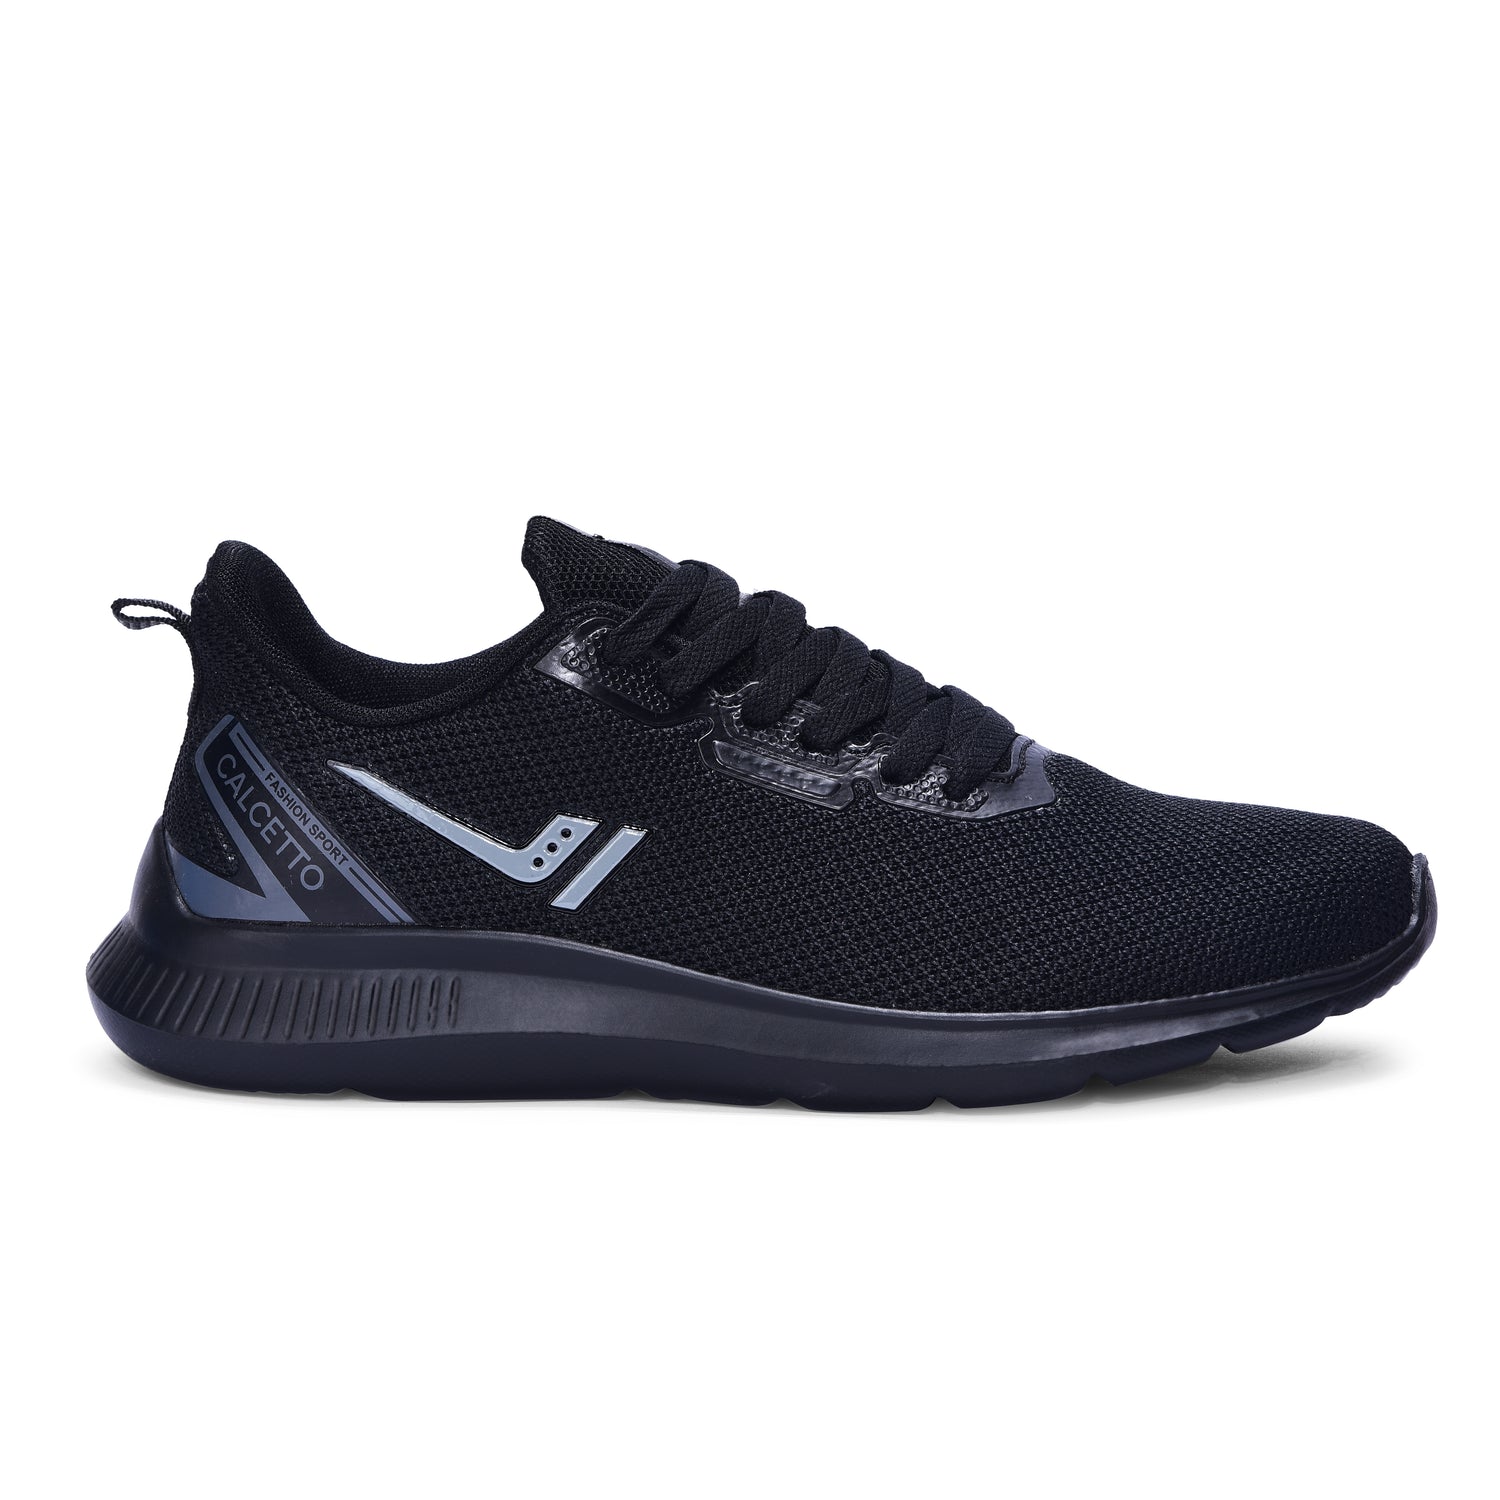 Calcetto CLT-9822 Full Black Women Casual Shoes